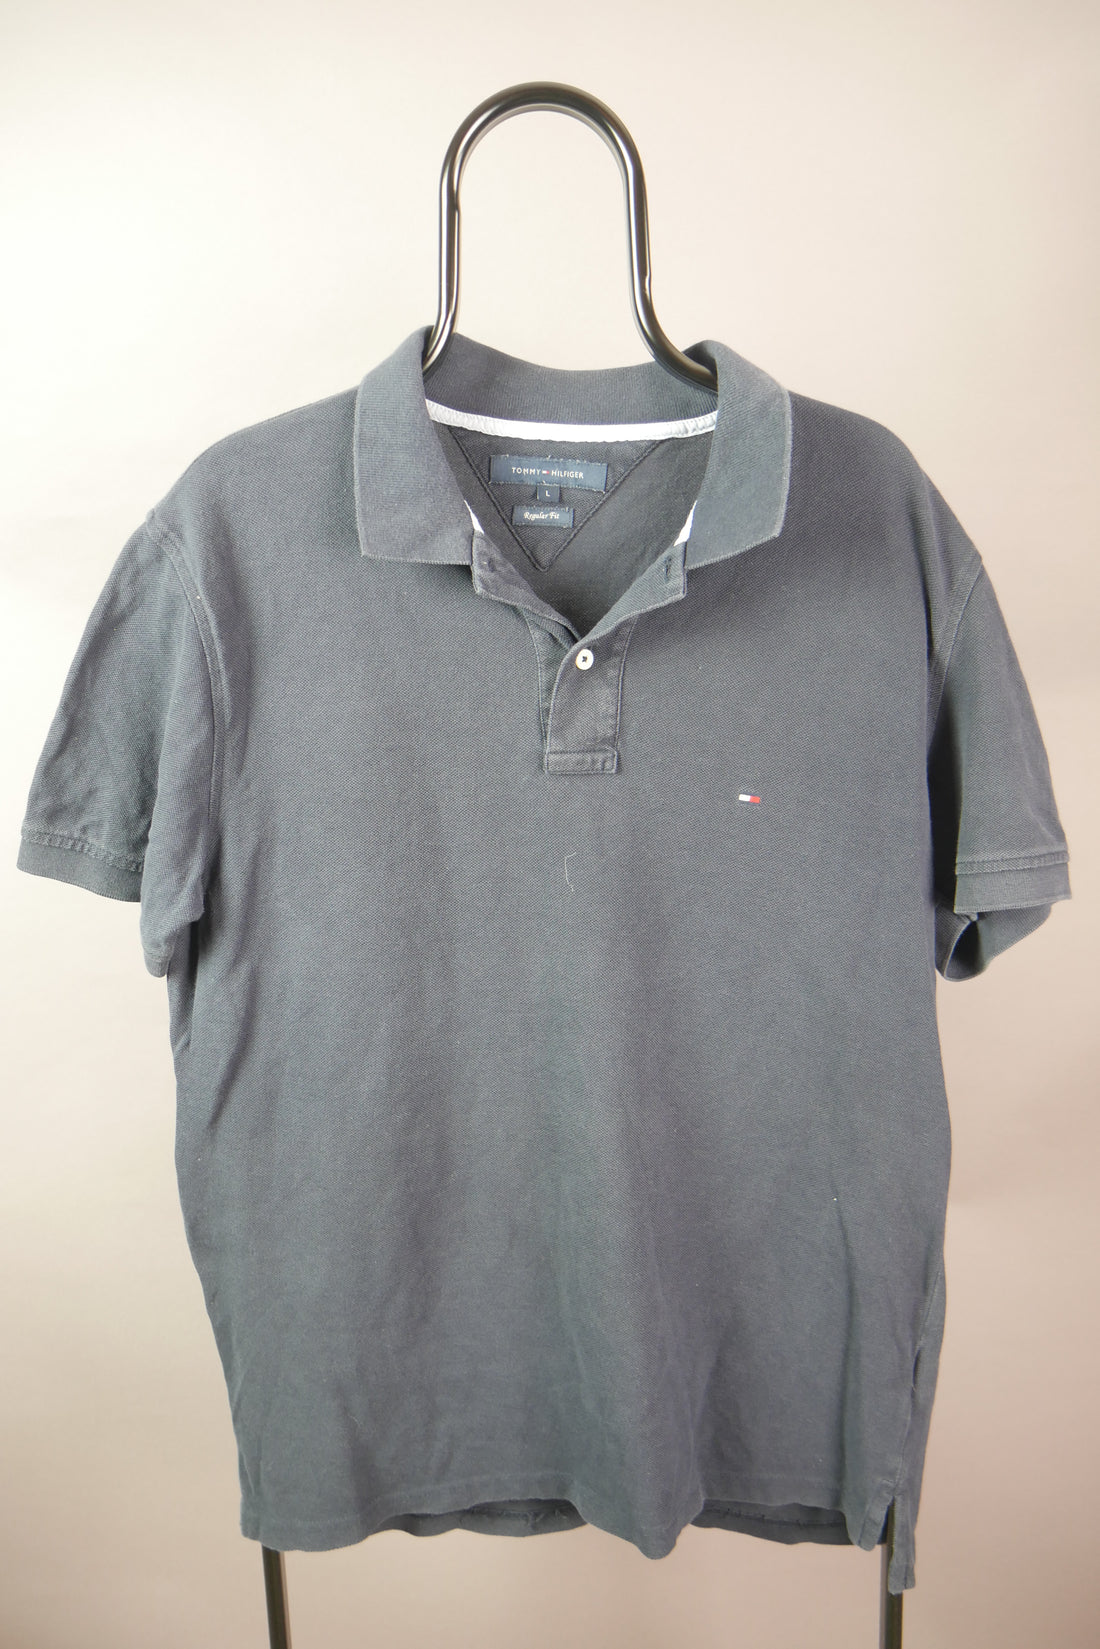 The Tommy Hilfiger Polo (L)